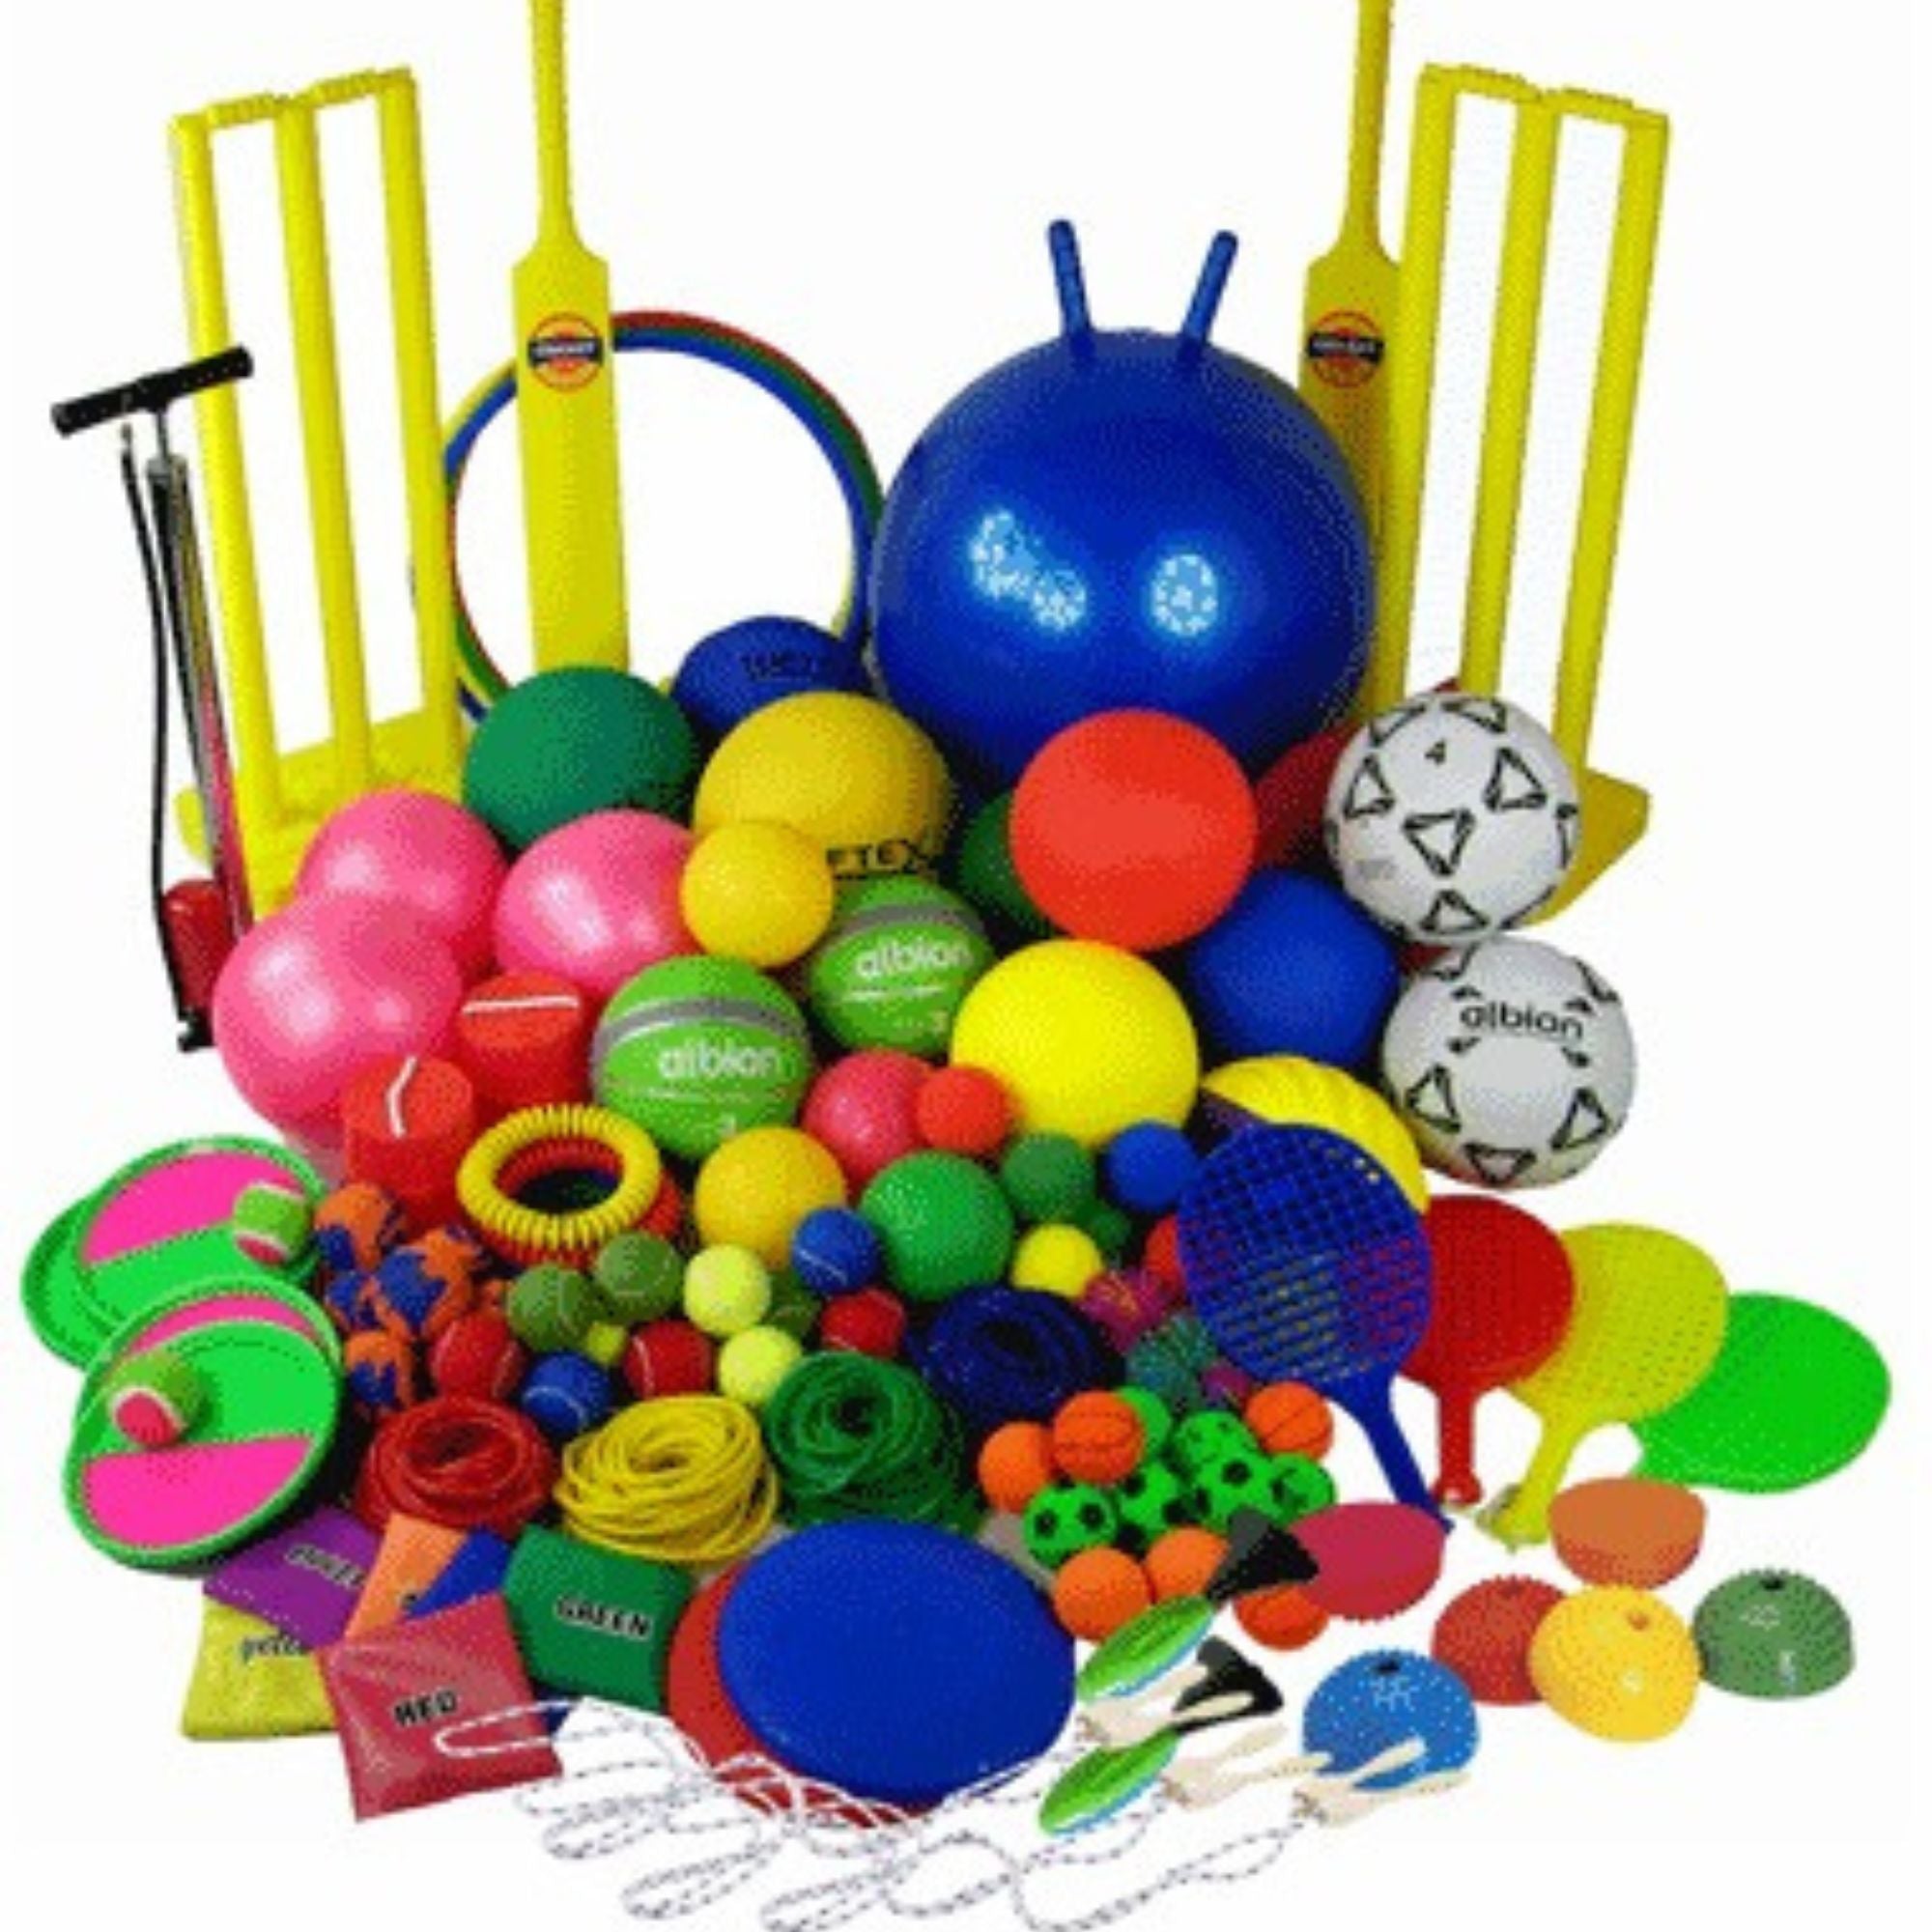 GetSetGo Multi Activity Pack A, The GetSetGo Multi Activity Pack is an extensive collection of equipment designed to encourage physical activity among children and enhance their motor skills, coordination, and overall well-being. Here's a breakdown of what this pack offers and how it can benefit educational institutions: Components of the GetSetGo Multi Activity Pack A: Ball Games Equipment: 2 Albion Basketballs Size 3 2 Albion Nylon Wound Footballs Size 4 1 Vortex Foam Rugby Ball 12 Tennis Balls Team Colou